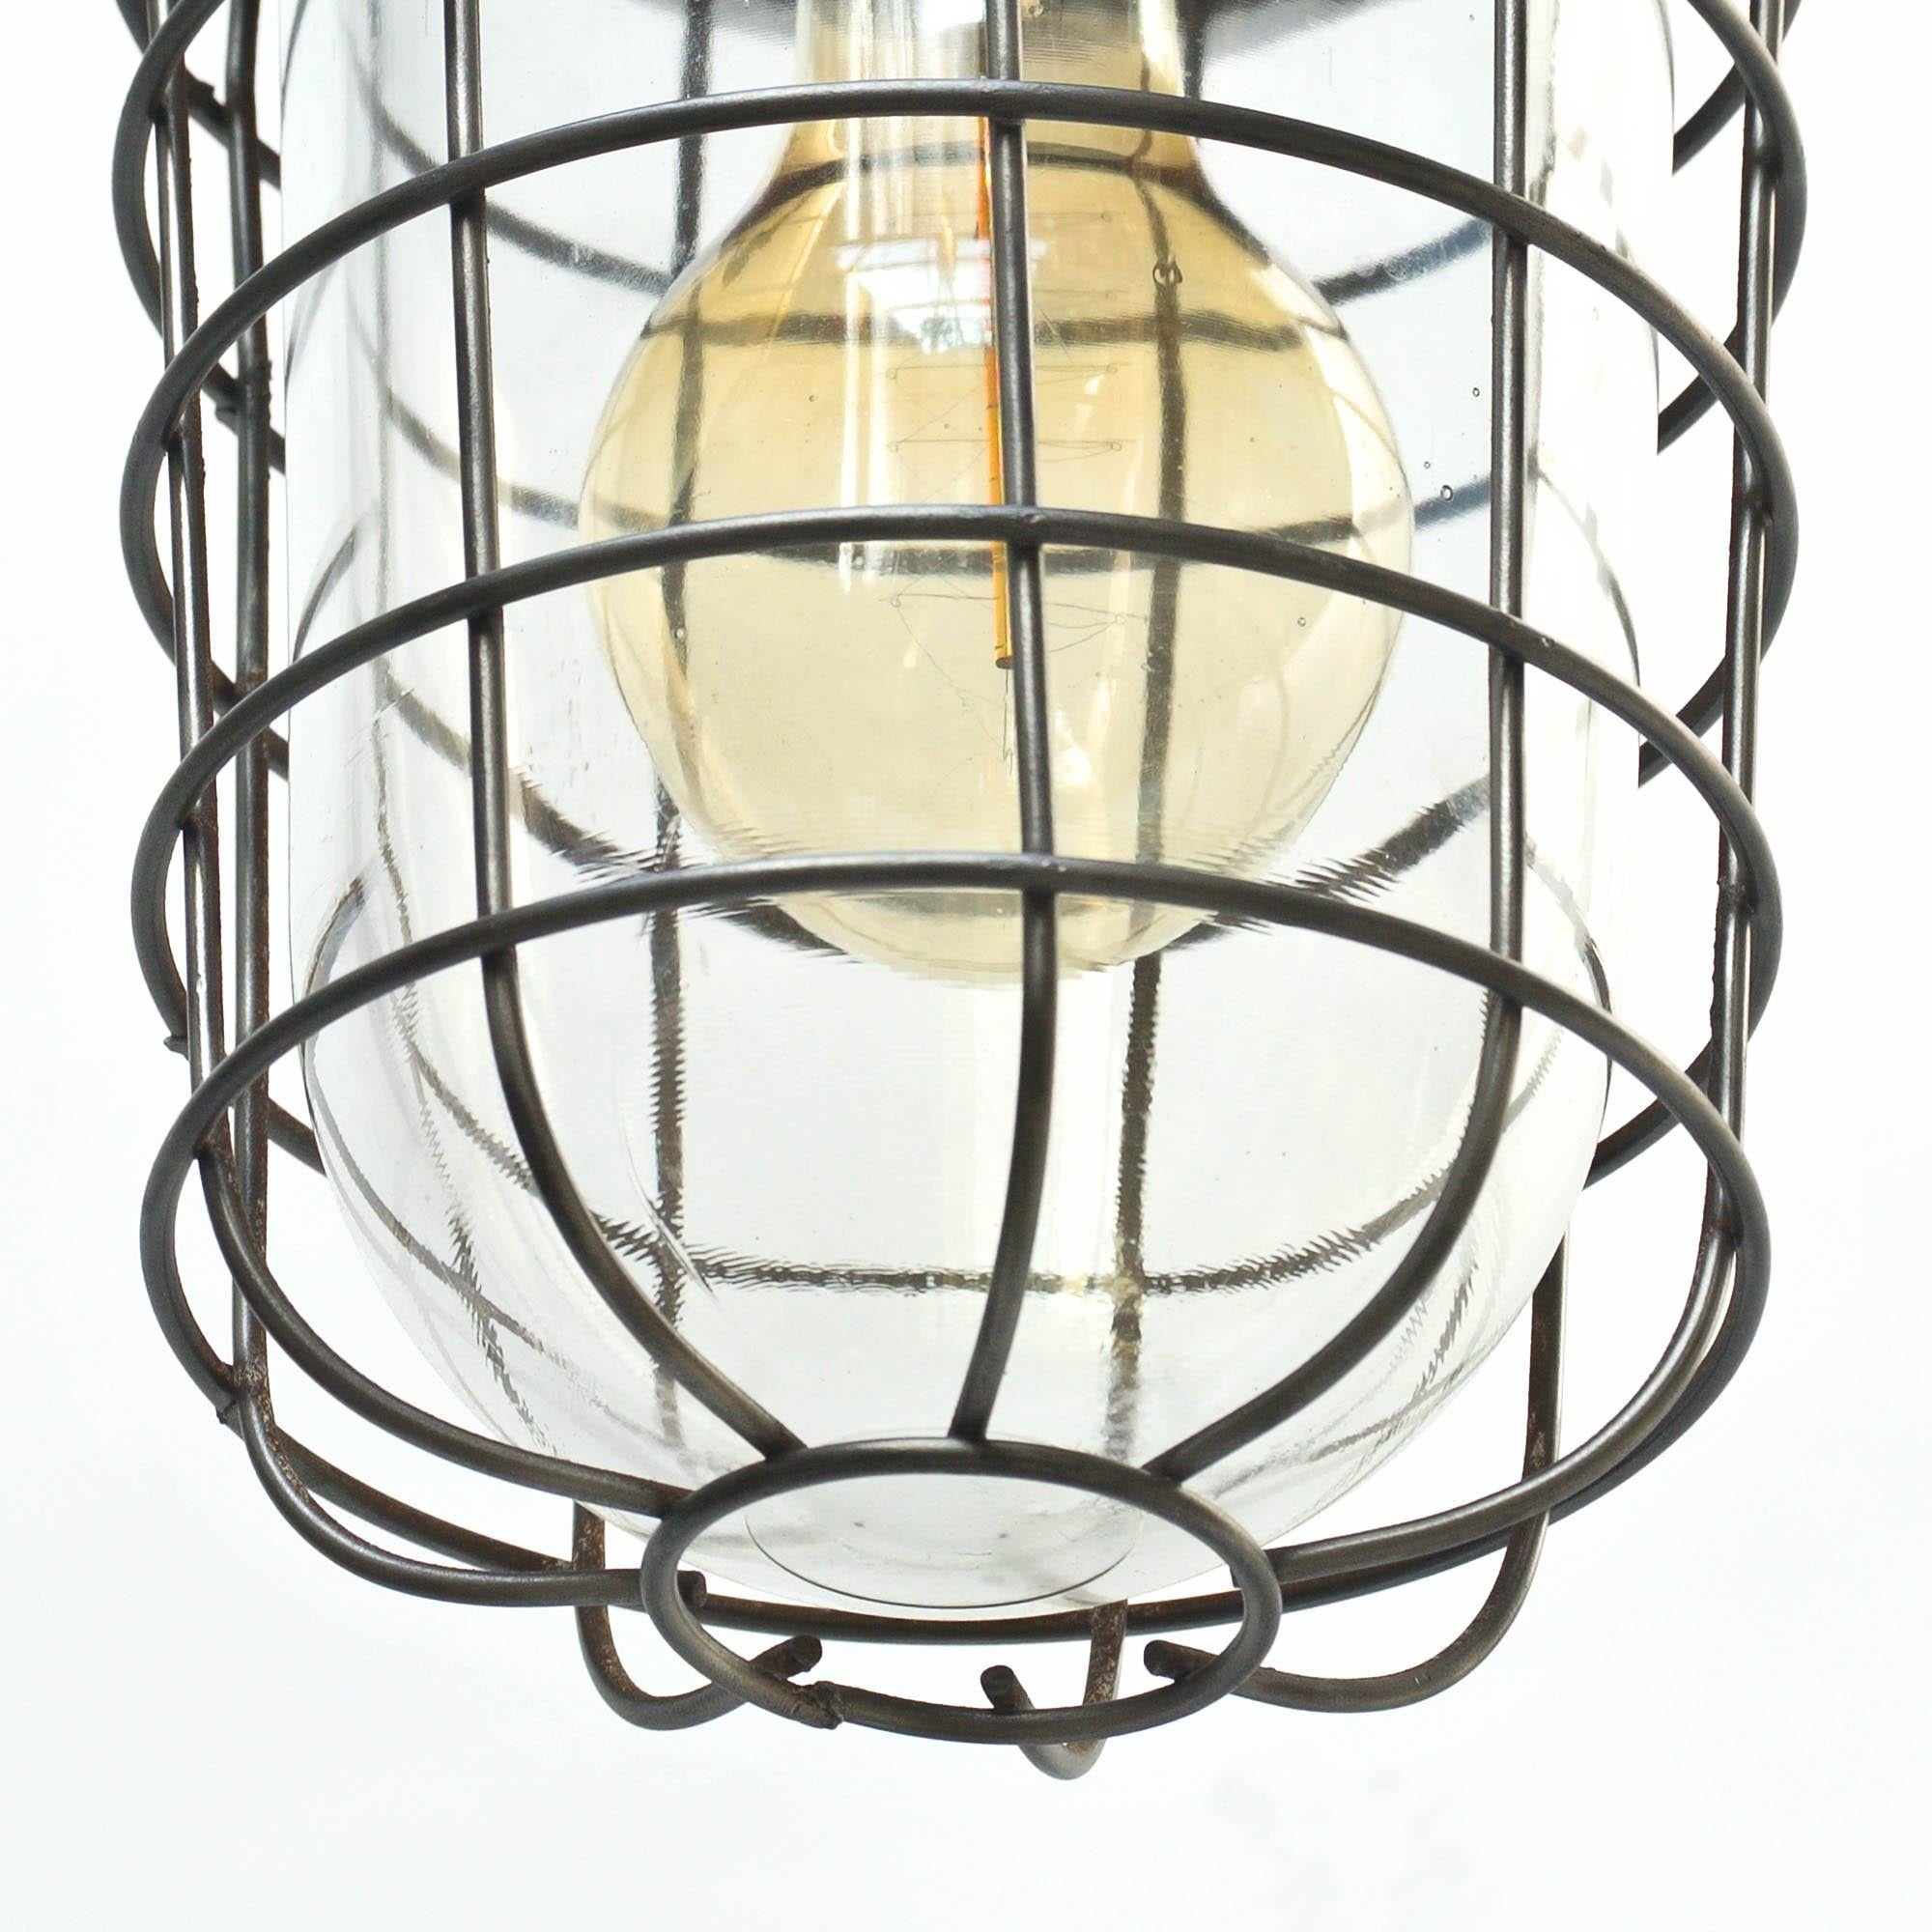 Mid-20th Century Ceiling Lamp, Glass Globe with Squared Fence, circa 1950-1959, France